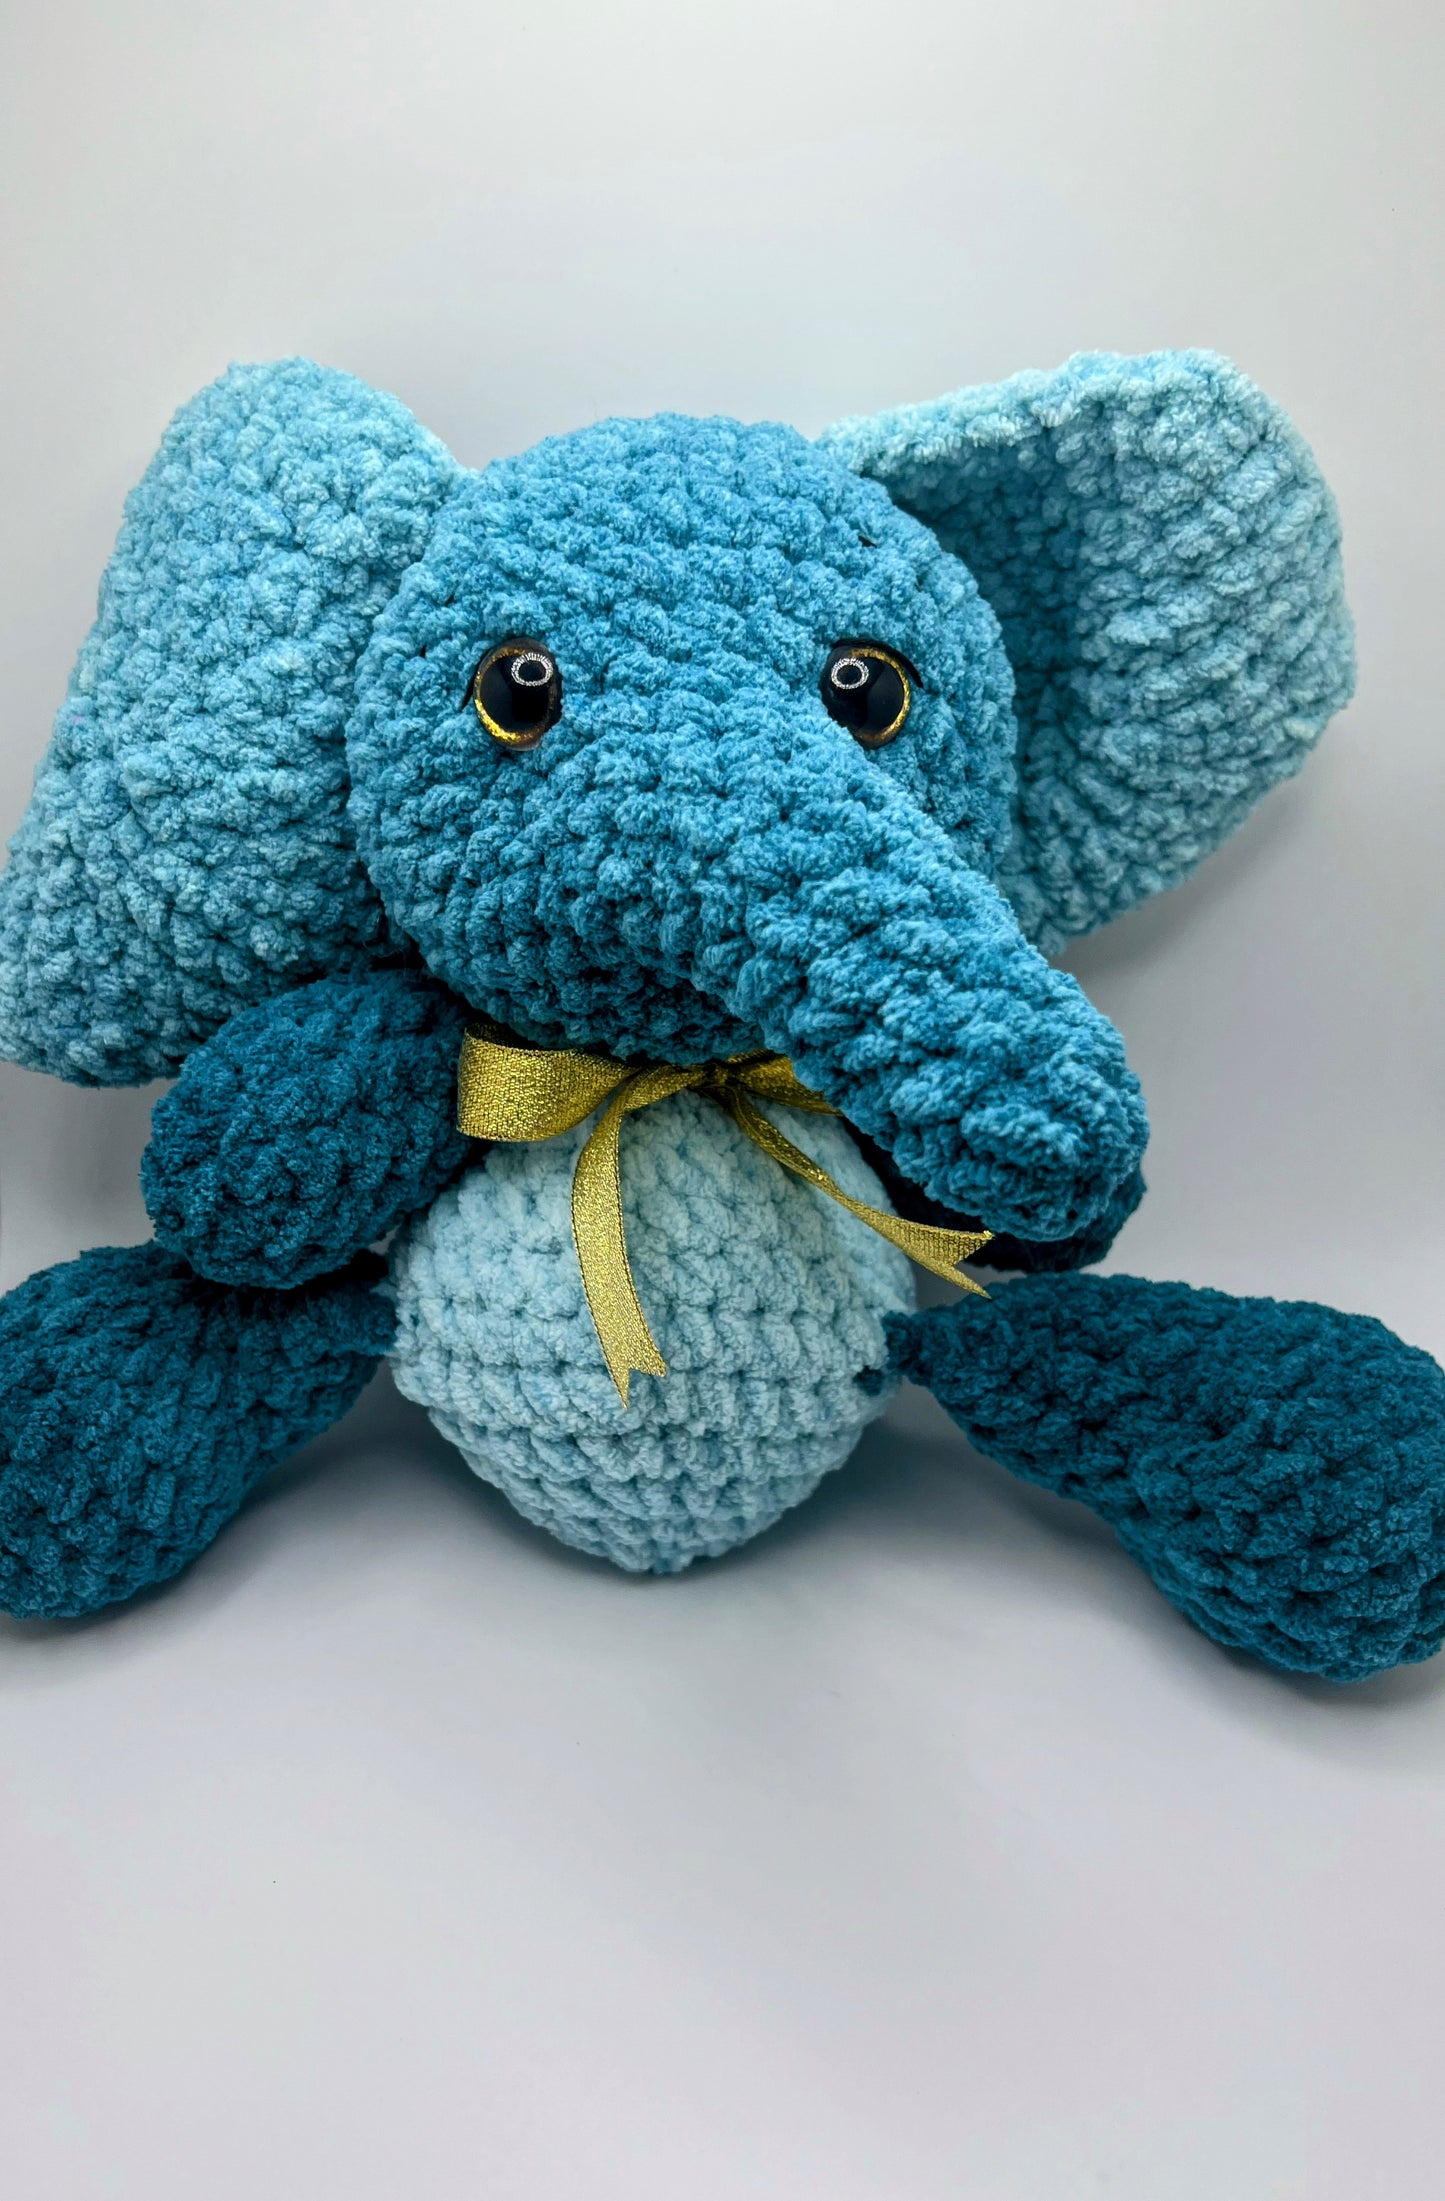 Stuffed Cute Elephant 🐘 Toy & Baby Elephants 🐘 - More Colors Available